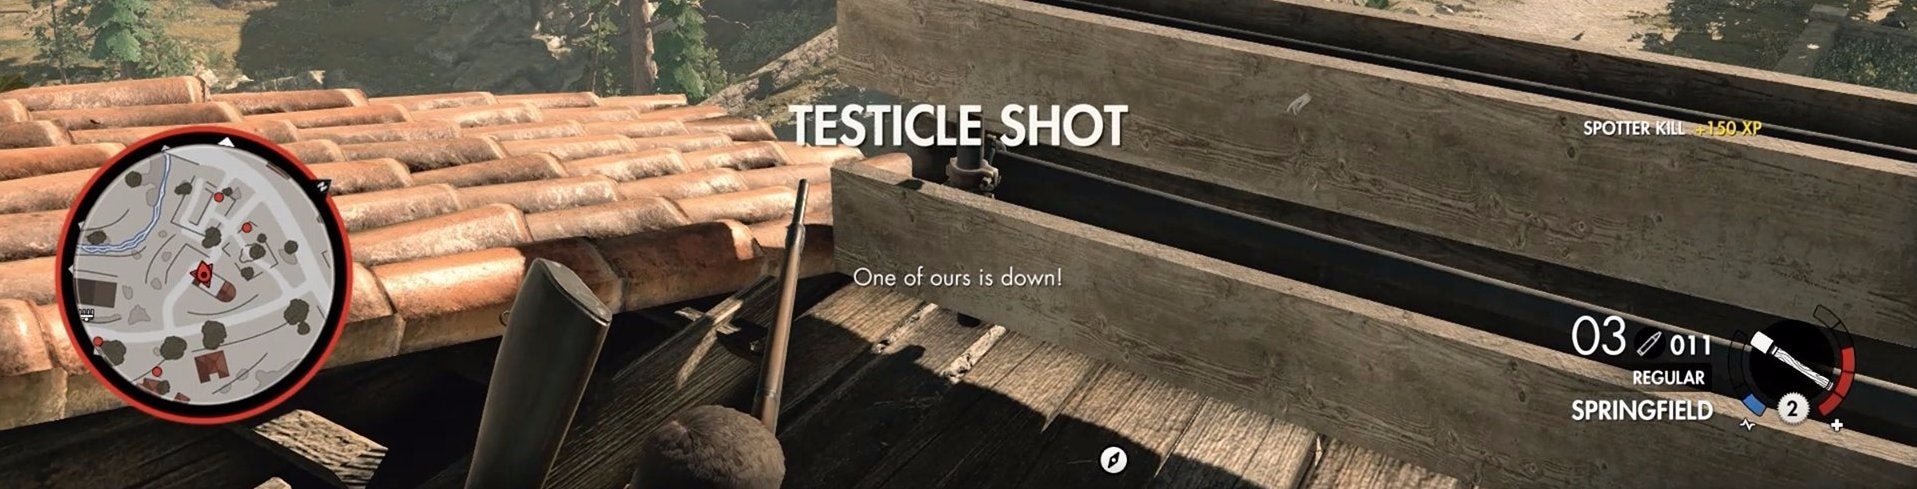 Image for Watch: 27 minutes of bollock-popping Sniper Elite 4 gameplay